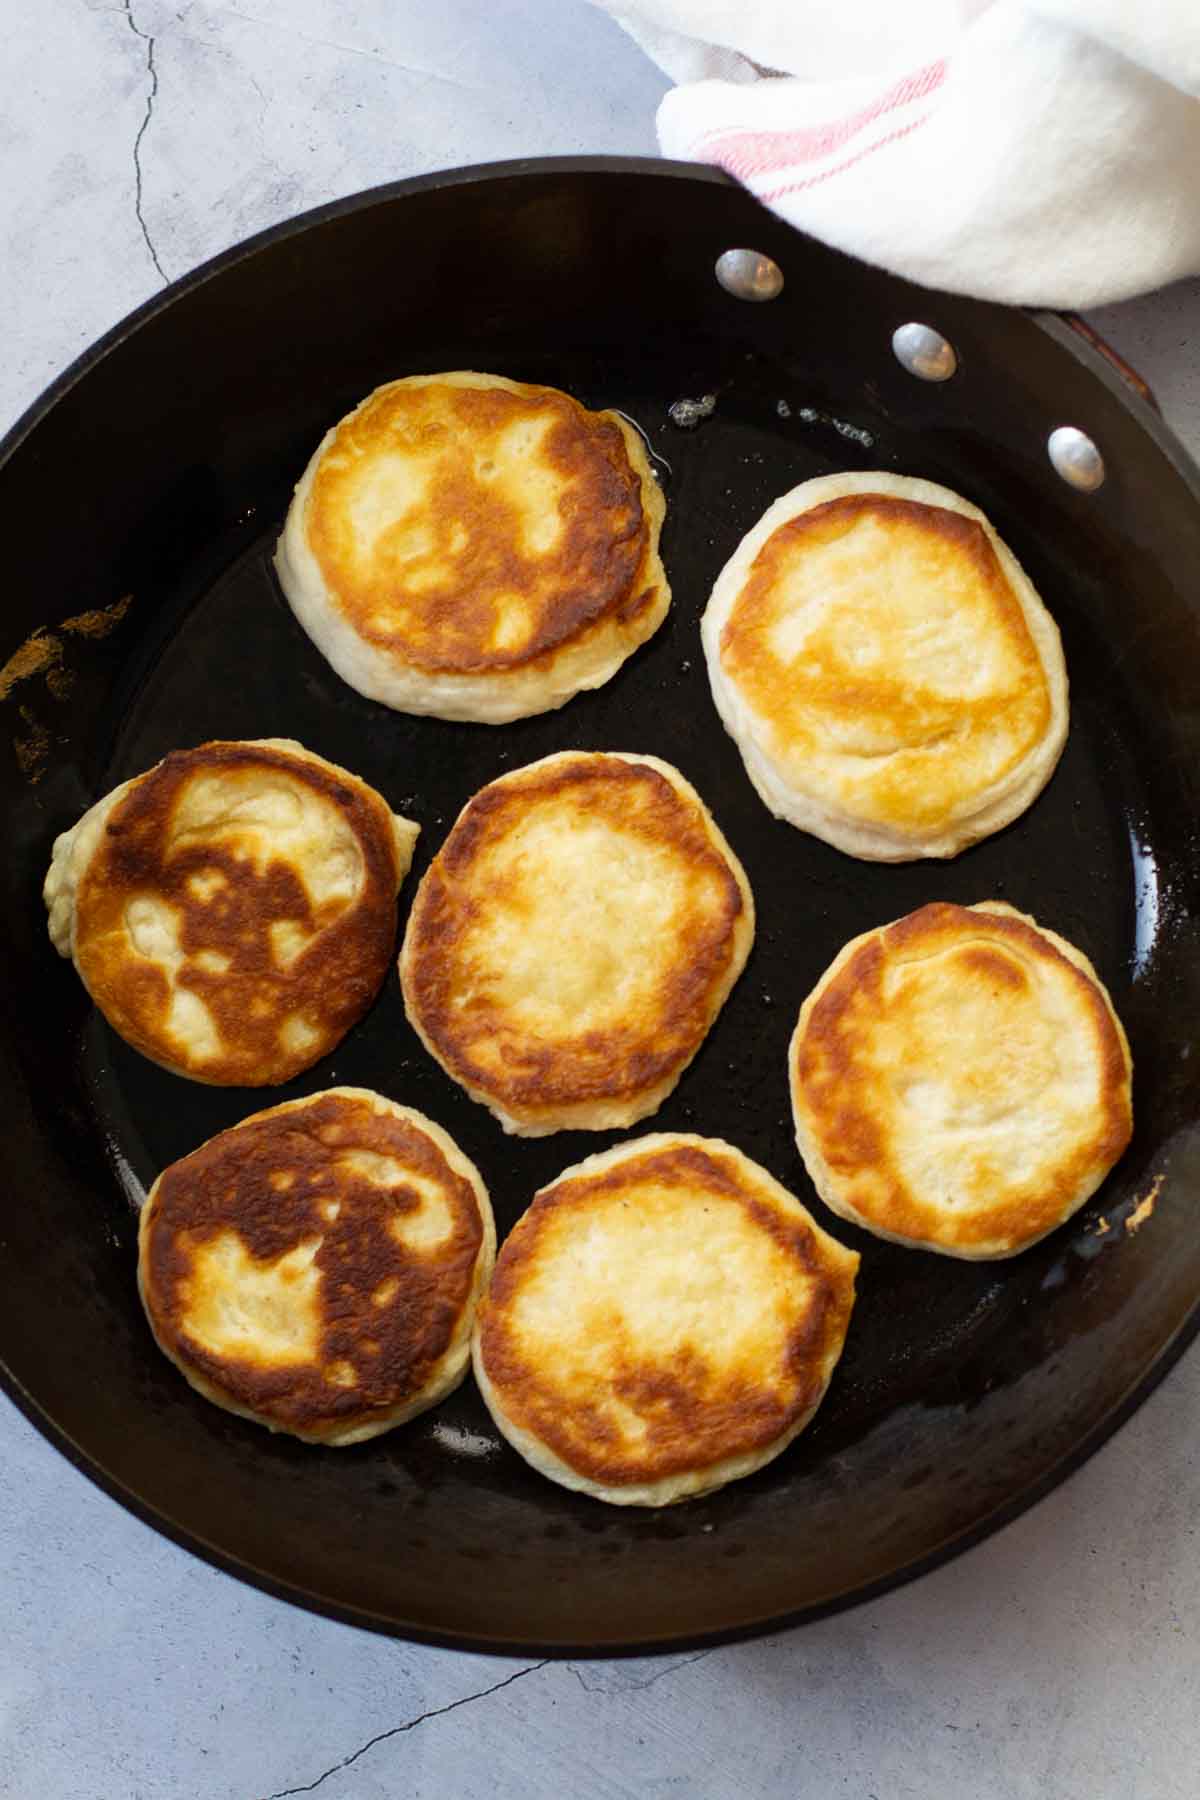 Fried biscuits in a large fry pan.